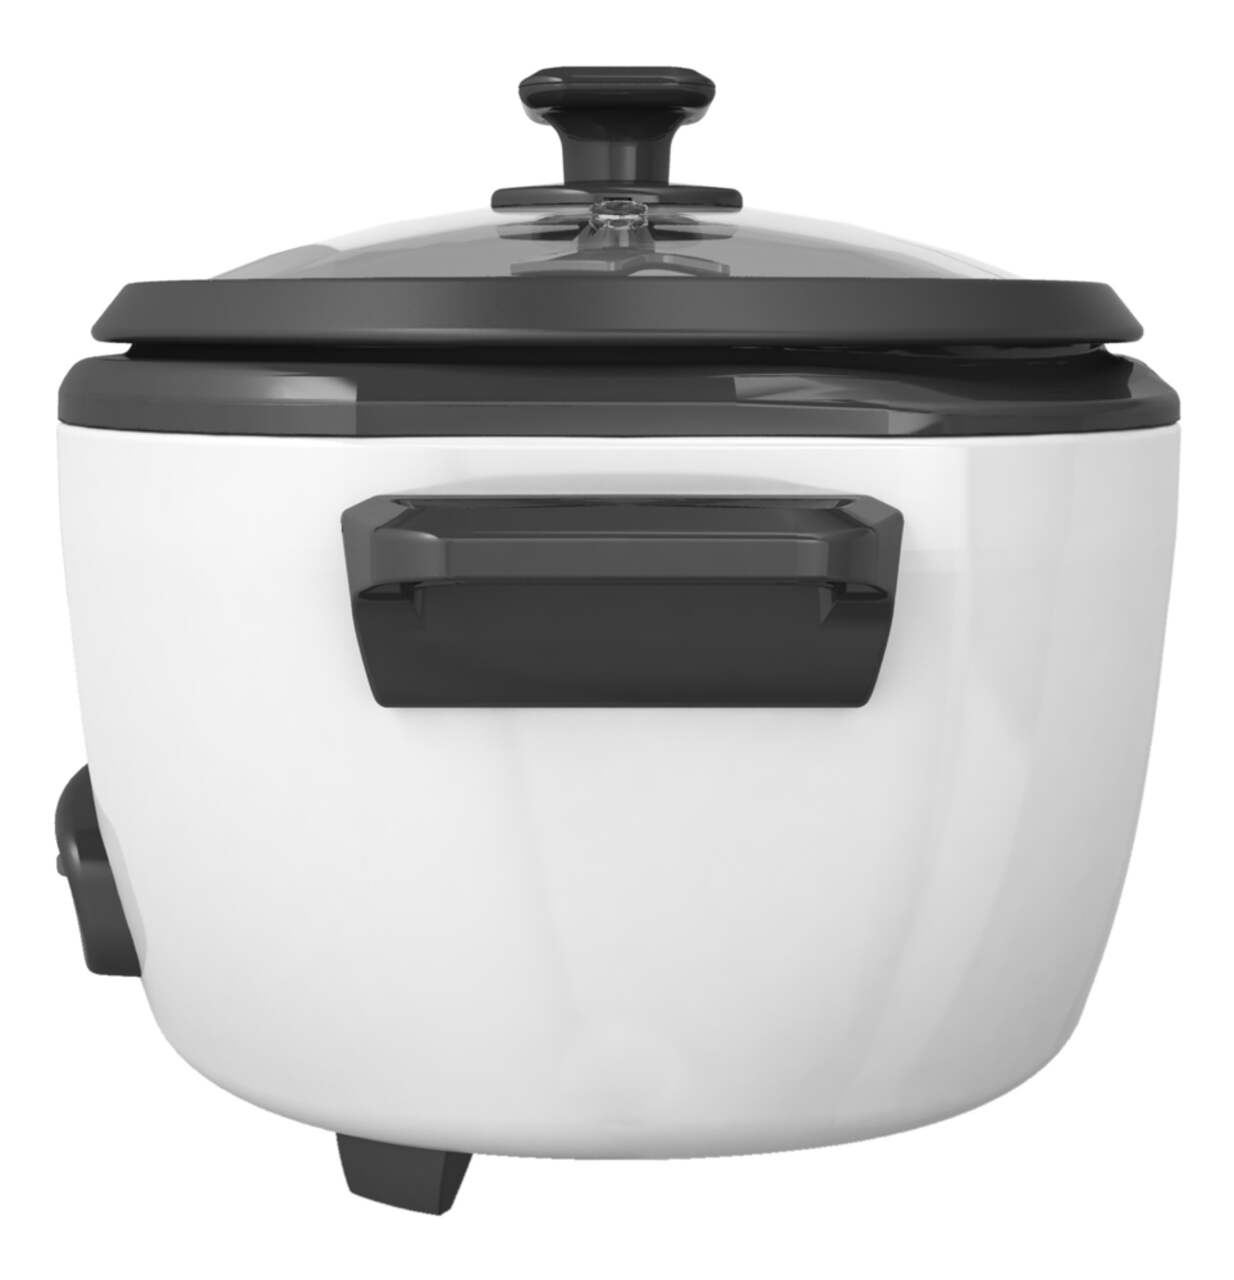 Black & Decker Rice Cooker and Food Steamer, 16-Cup Capacity